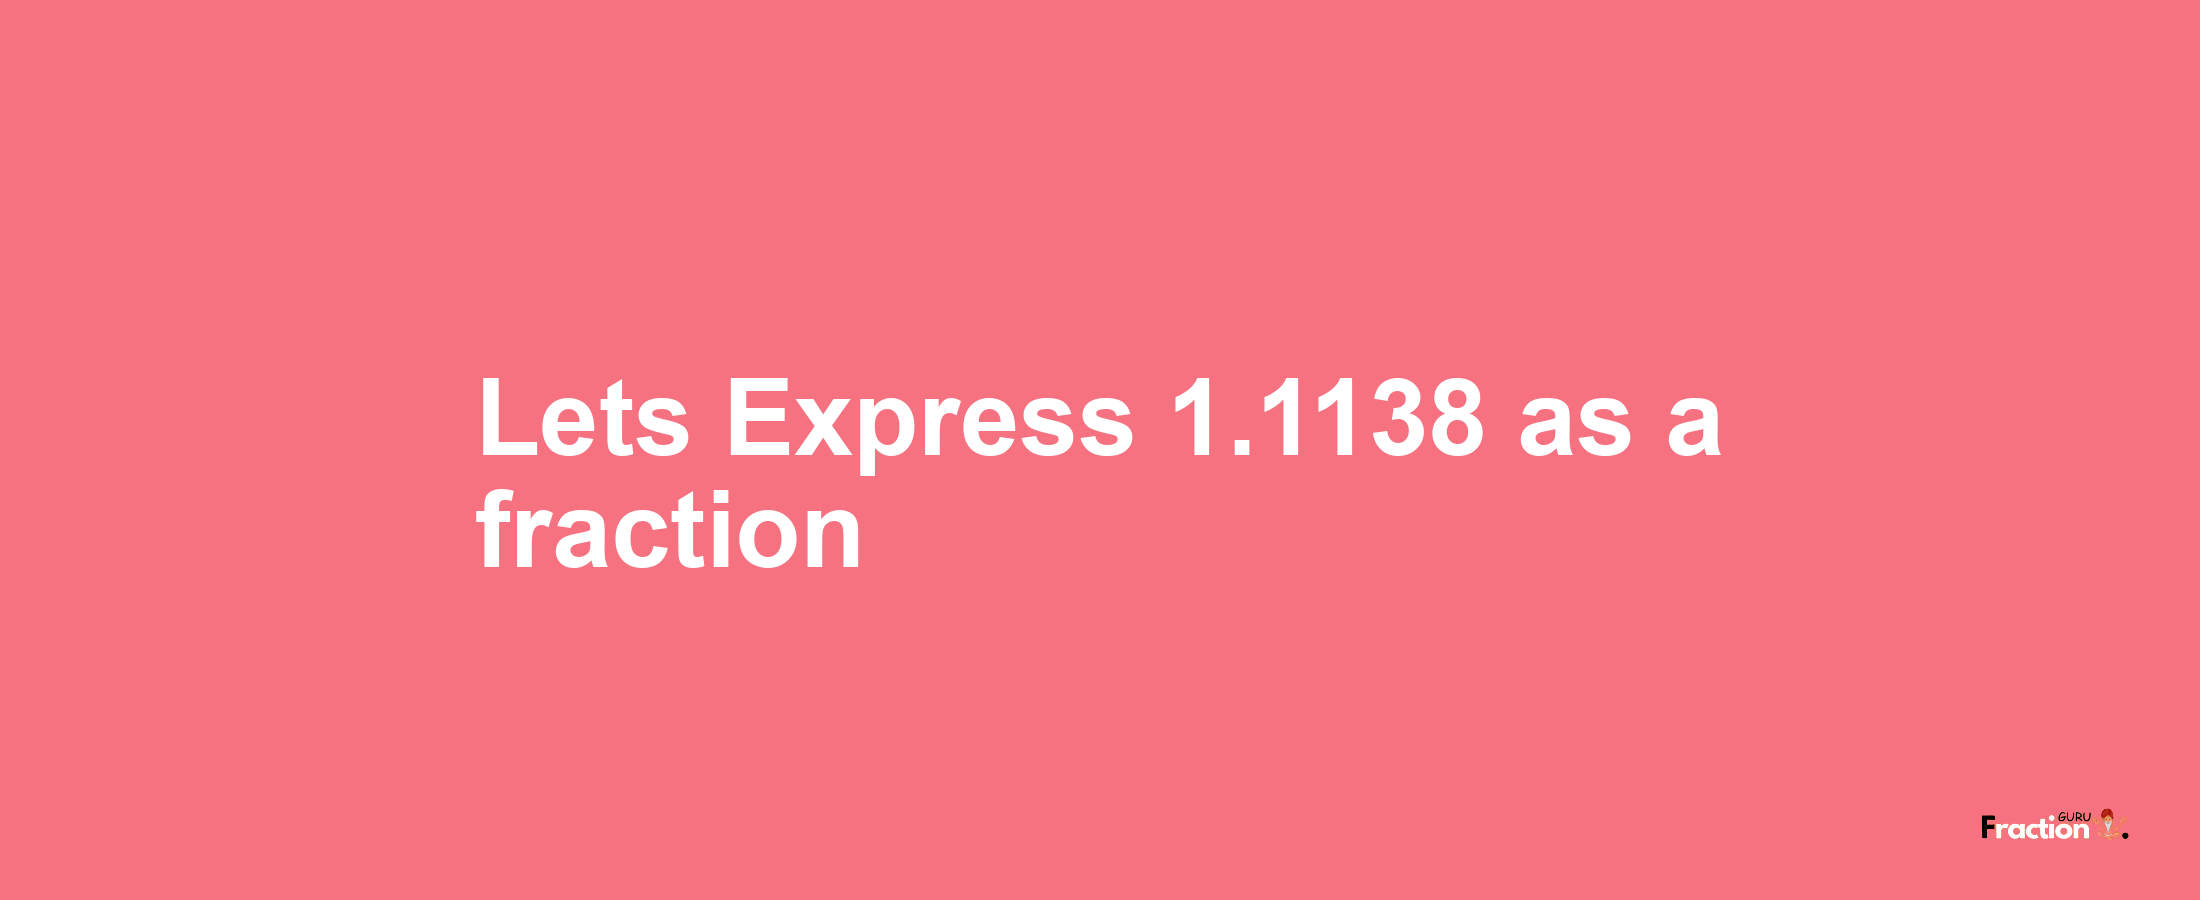 Lets Express 1.1138 as afraction